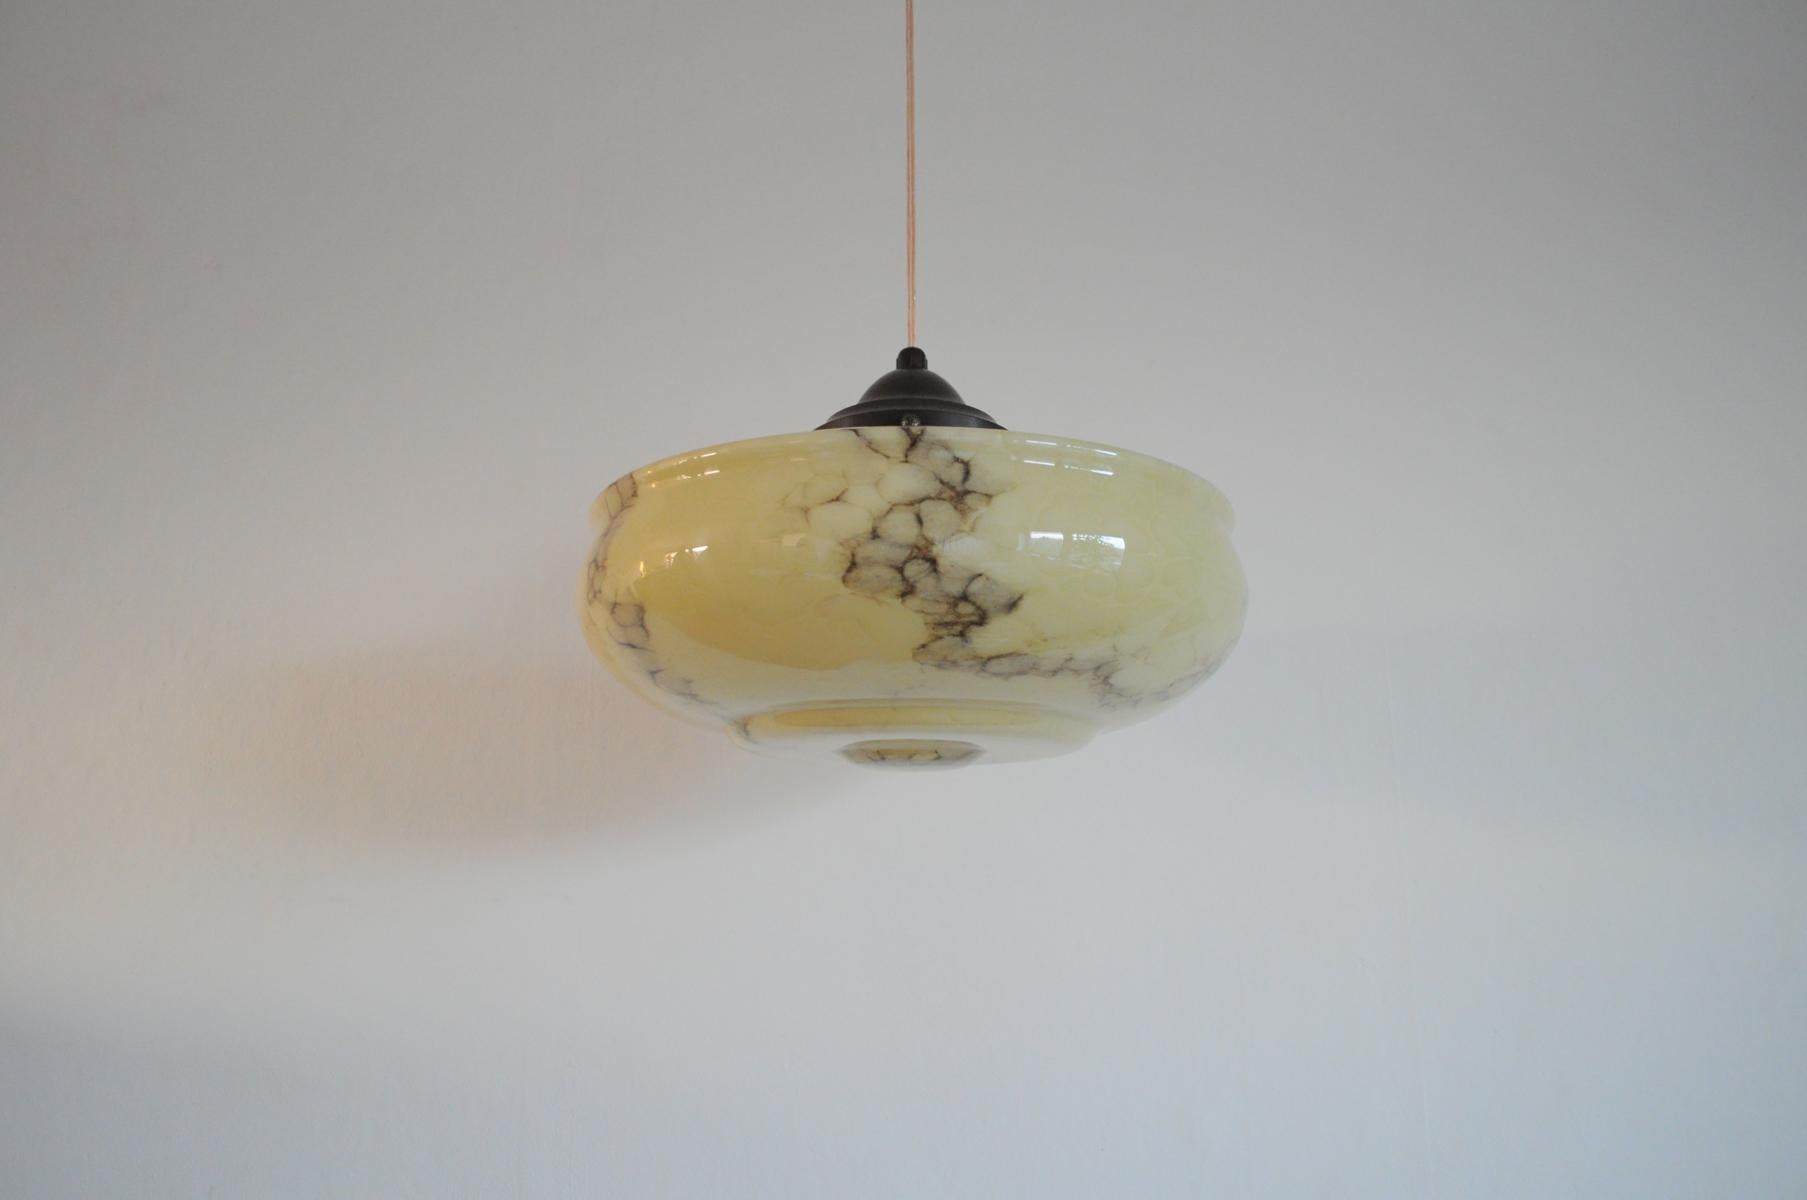 Antique round marbled glass pendant light with the original shade holder and canopy from the 1930s.

Excellent condition.
Light source: E27 Edison screw fitting, rewired.
Dimensions: Height 23 cm 
Diameter 32 cm.